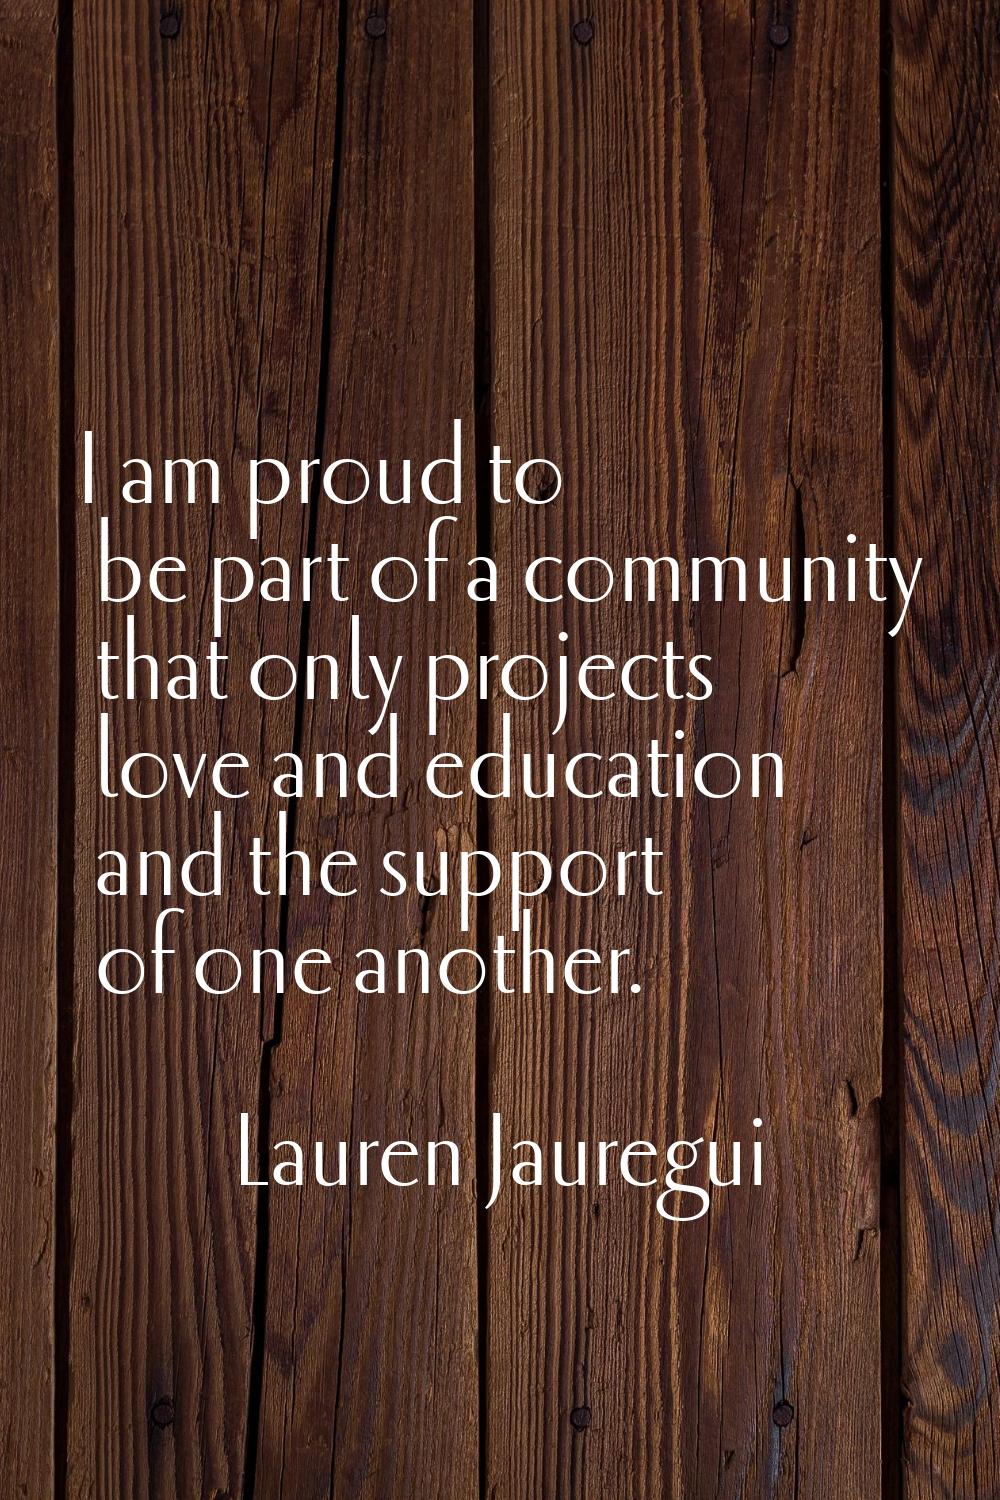 I am proud to be part of a community that only projects love and education and the support of one a